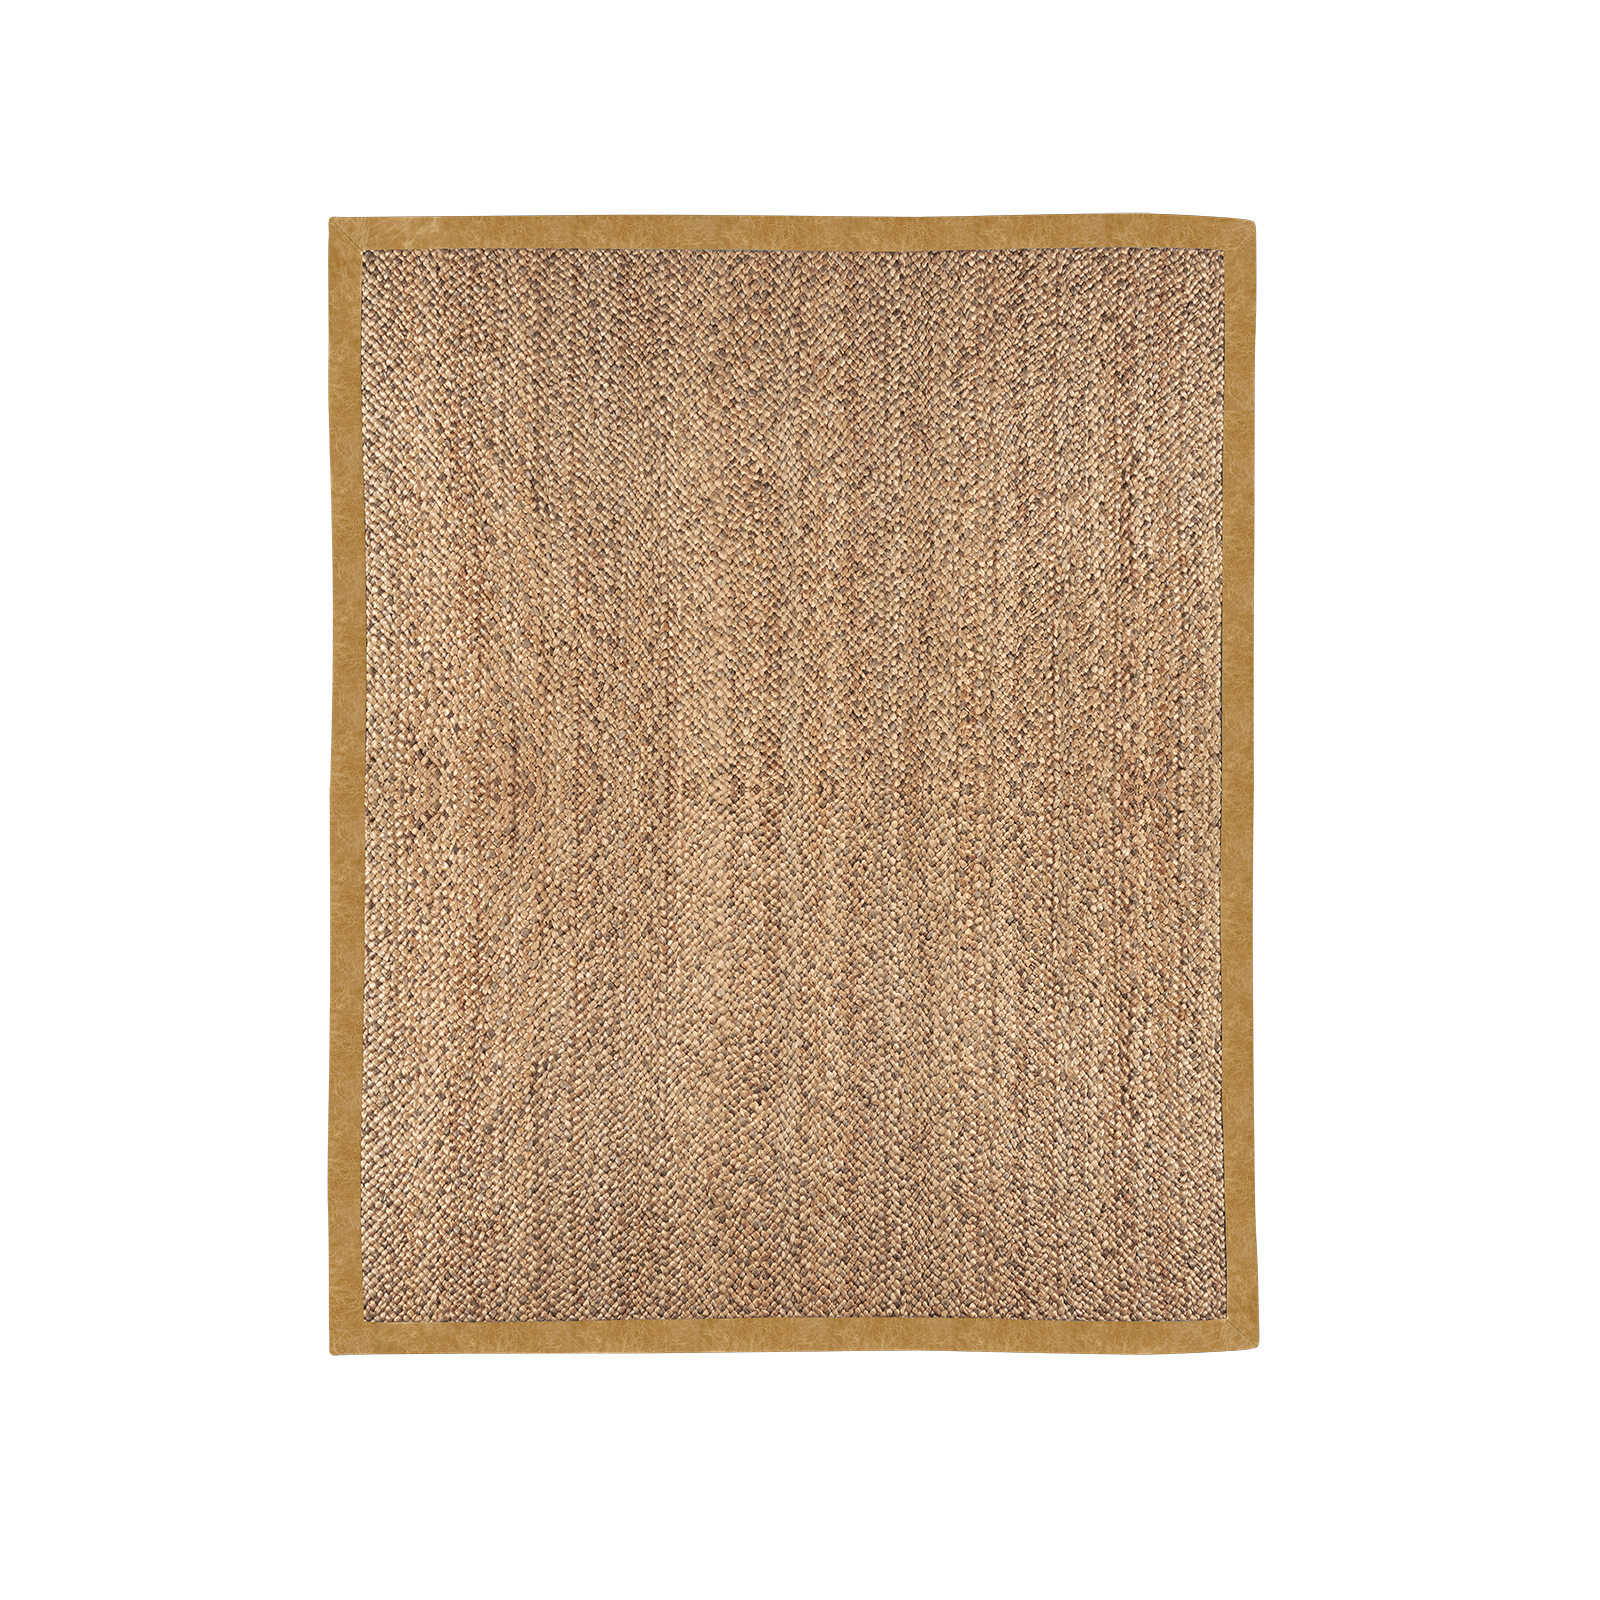 Woven Jute Rug with Leather Border